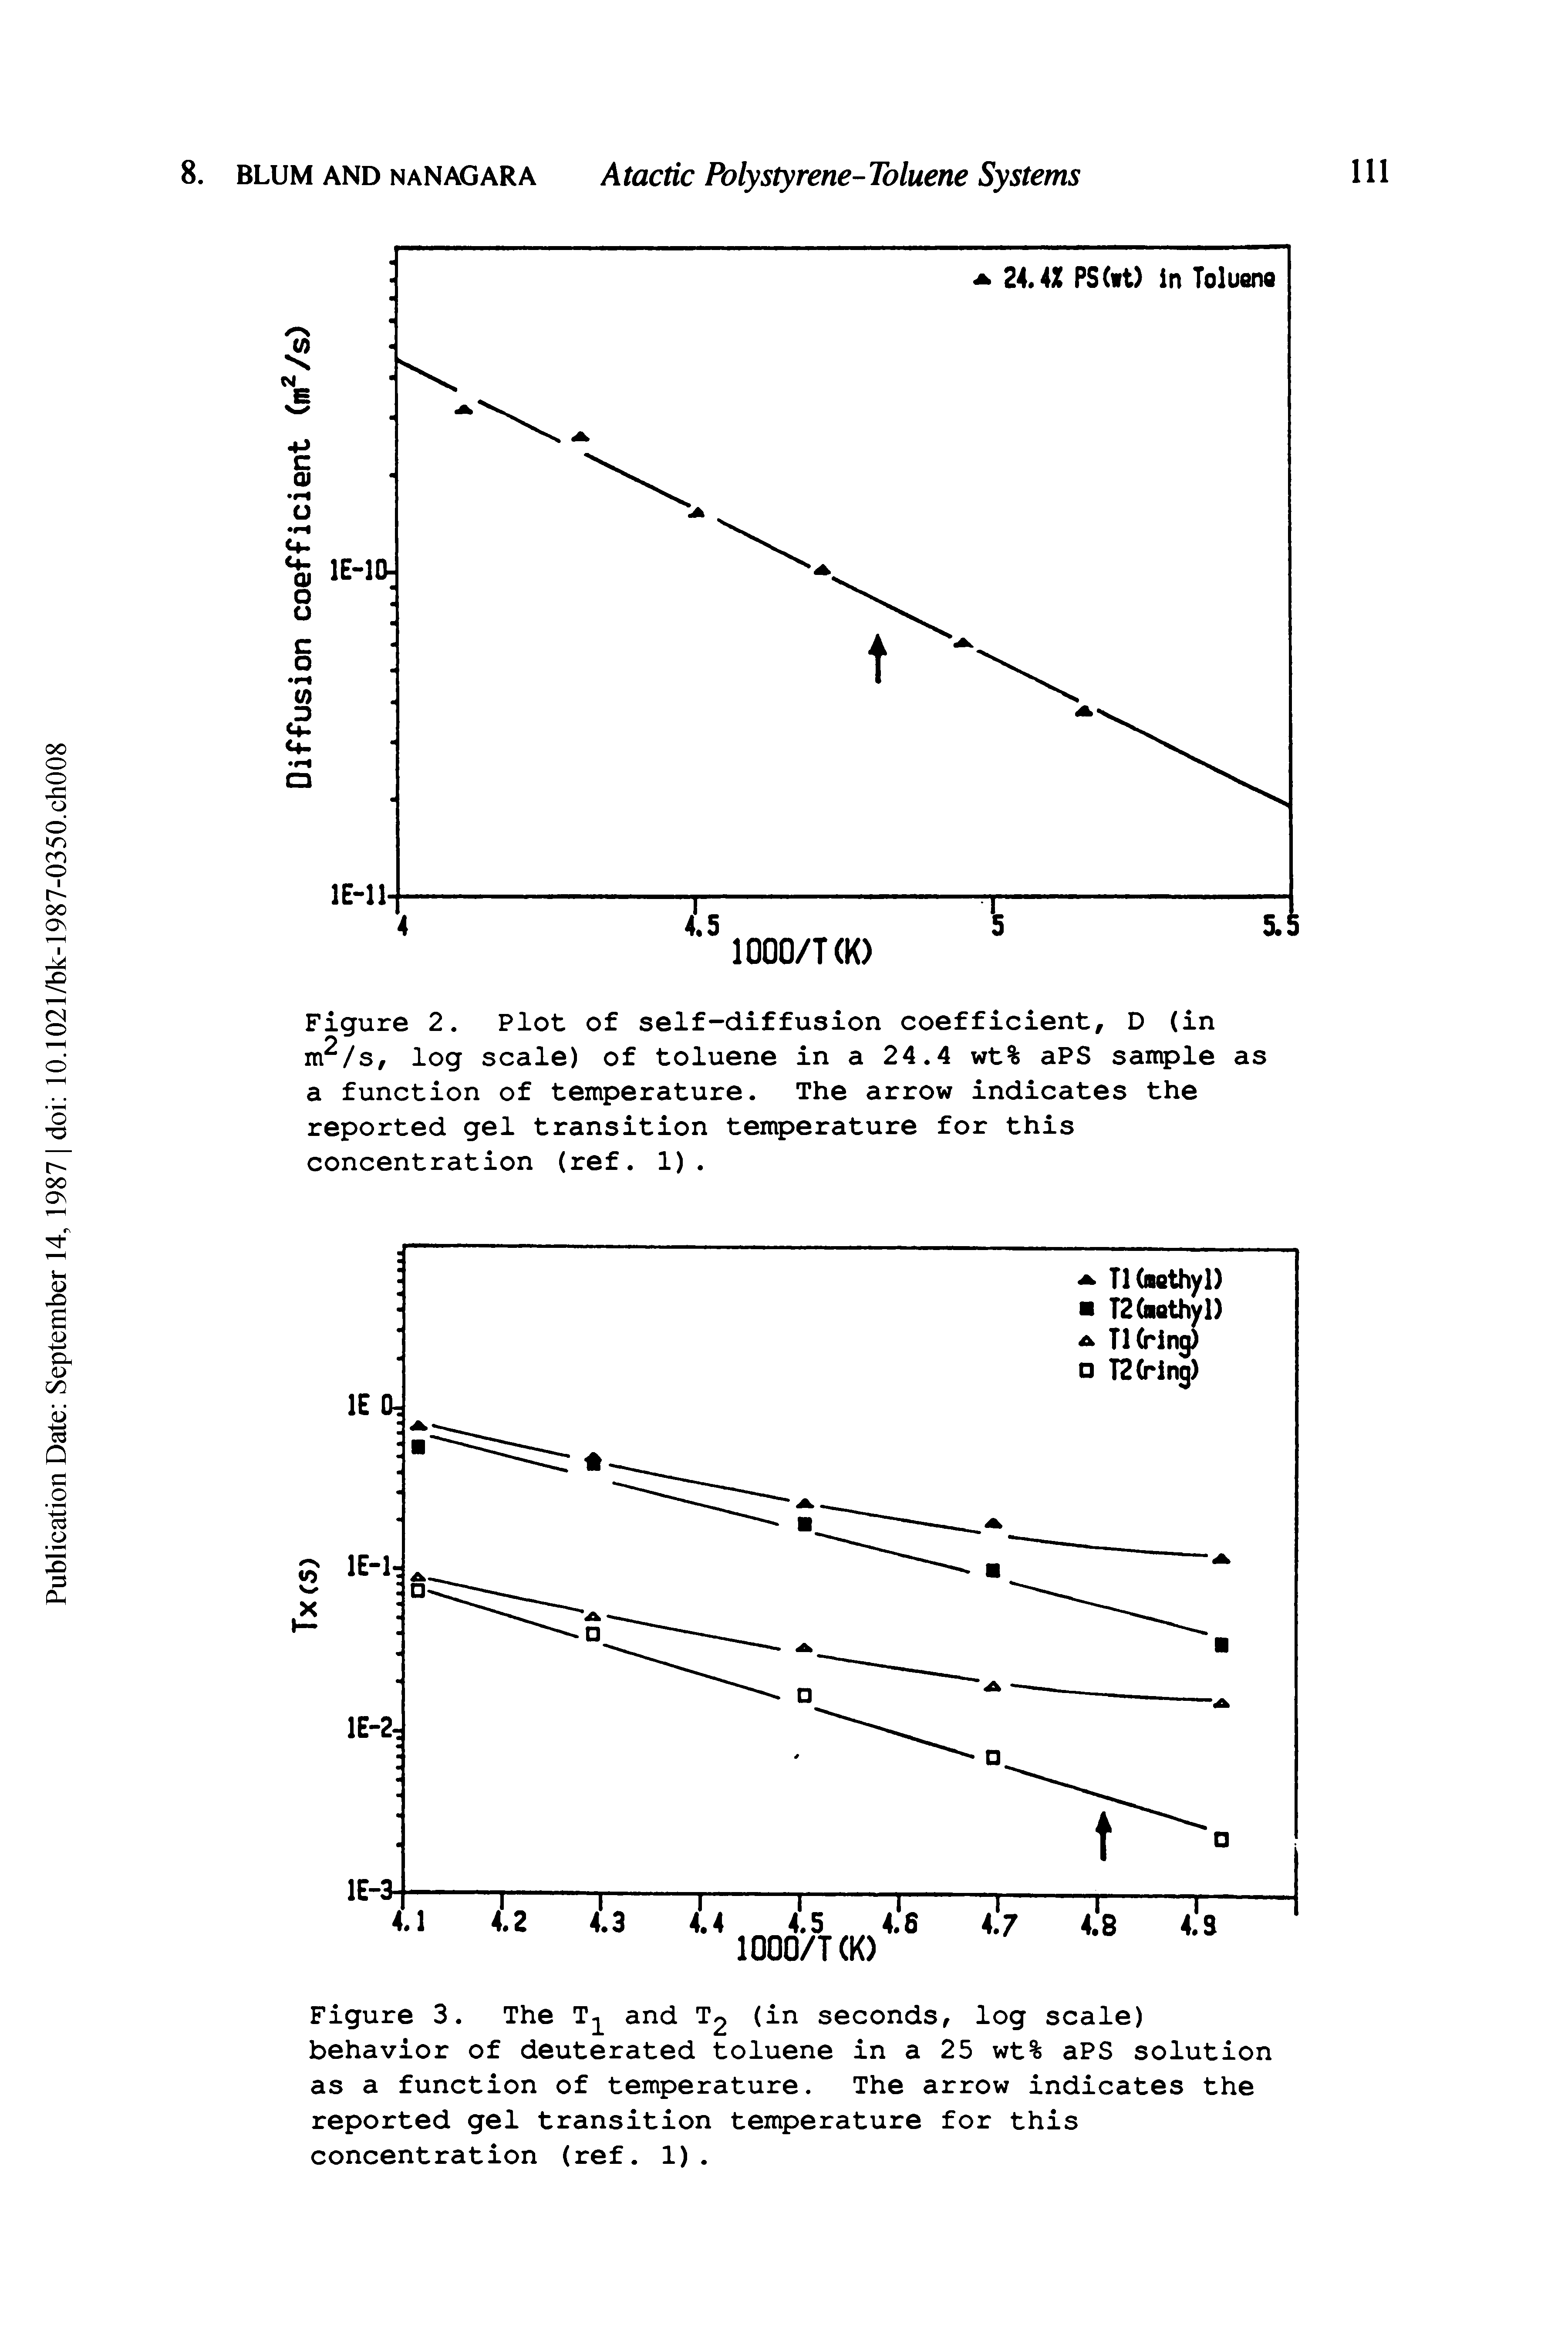 Figure 2. Plot of self-diffusion coefficient, D (in m /s, log scale) of toluene in a 24.4 wt% aPS sample as a function of temperature. The arrow indicates the reported gel transition temperature for this concentration (ref. 1).